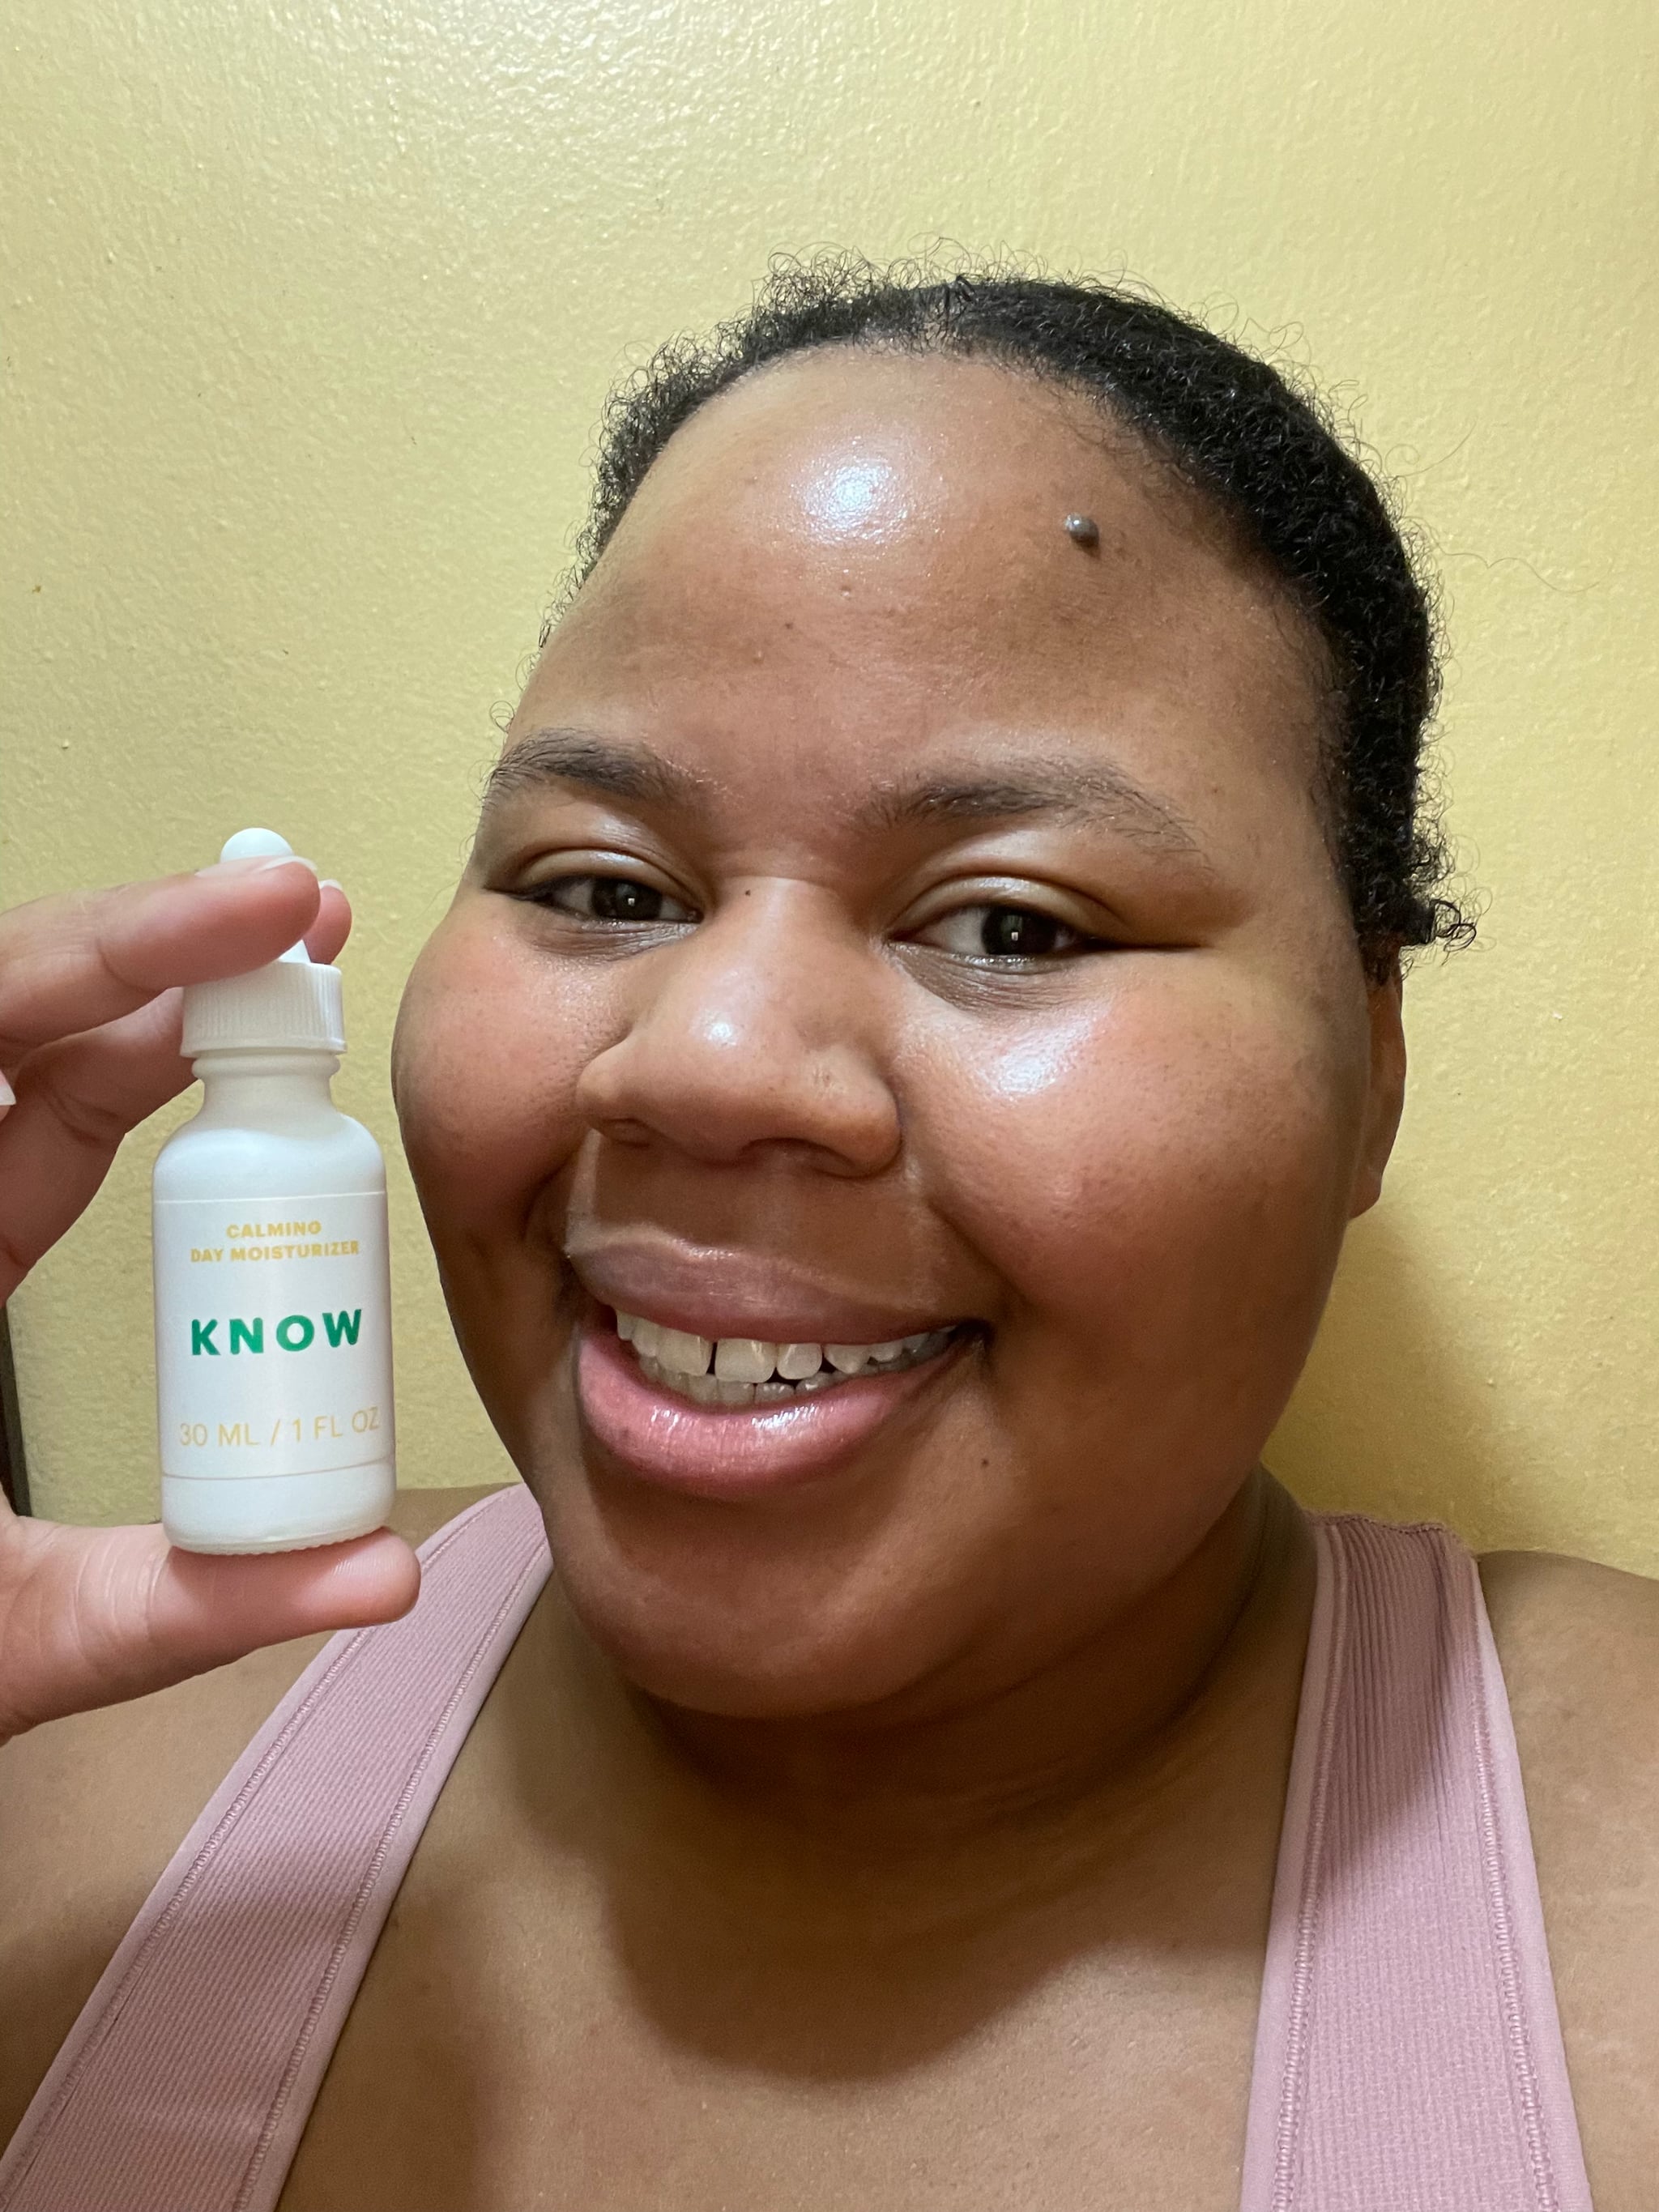 KNOW Beauty Calming Day Moisturiser Review